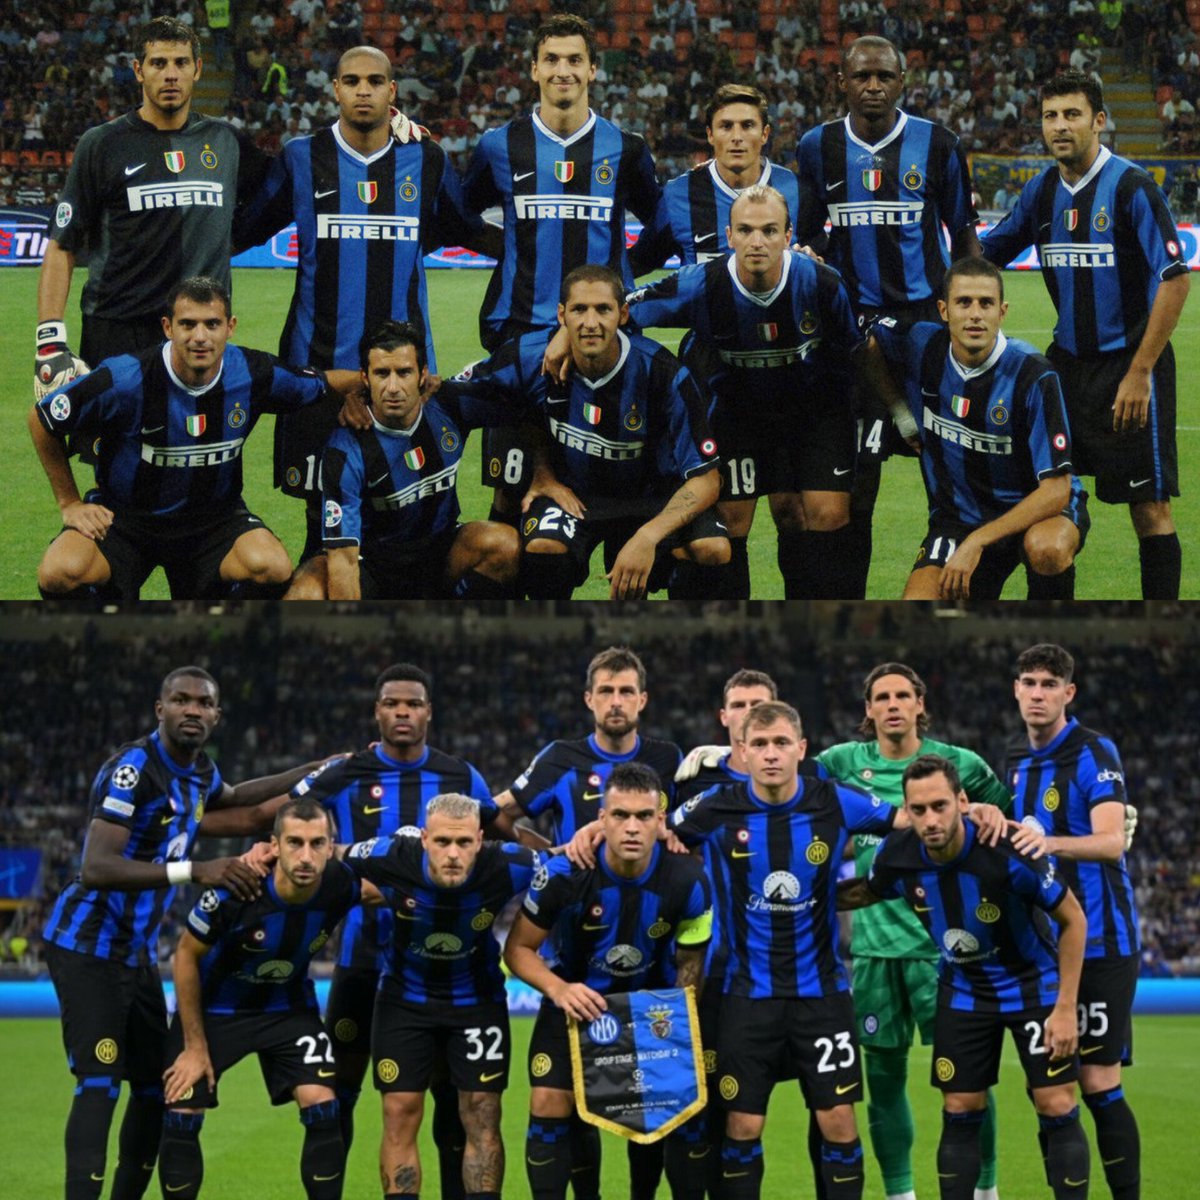 Points after 28 games in Serie A: - Inter 2006/2007: 76pts - Inter 2023/2024: 75pts